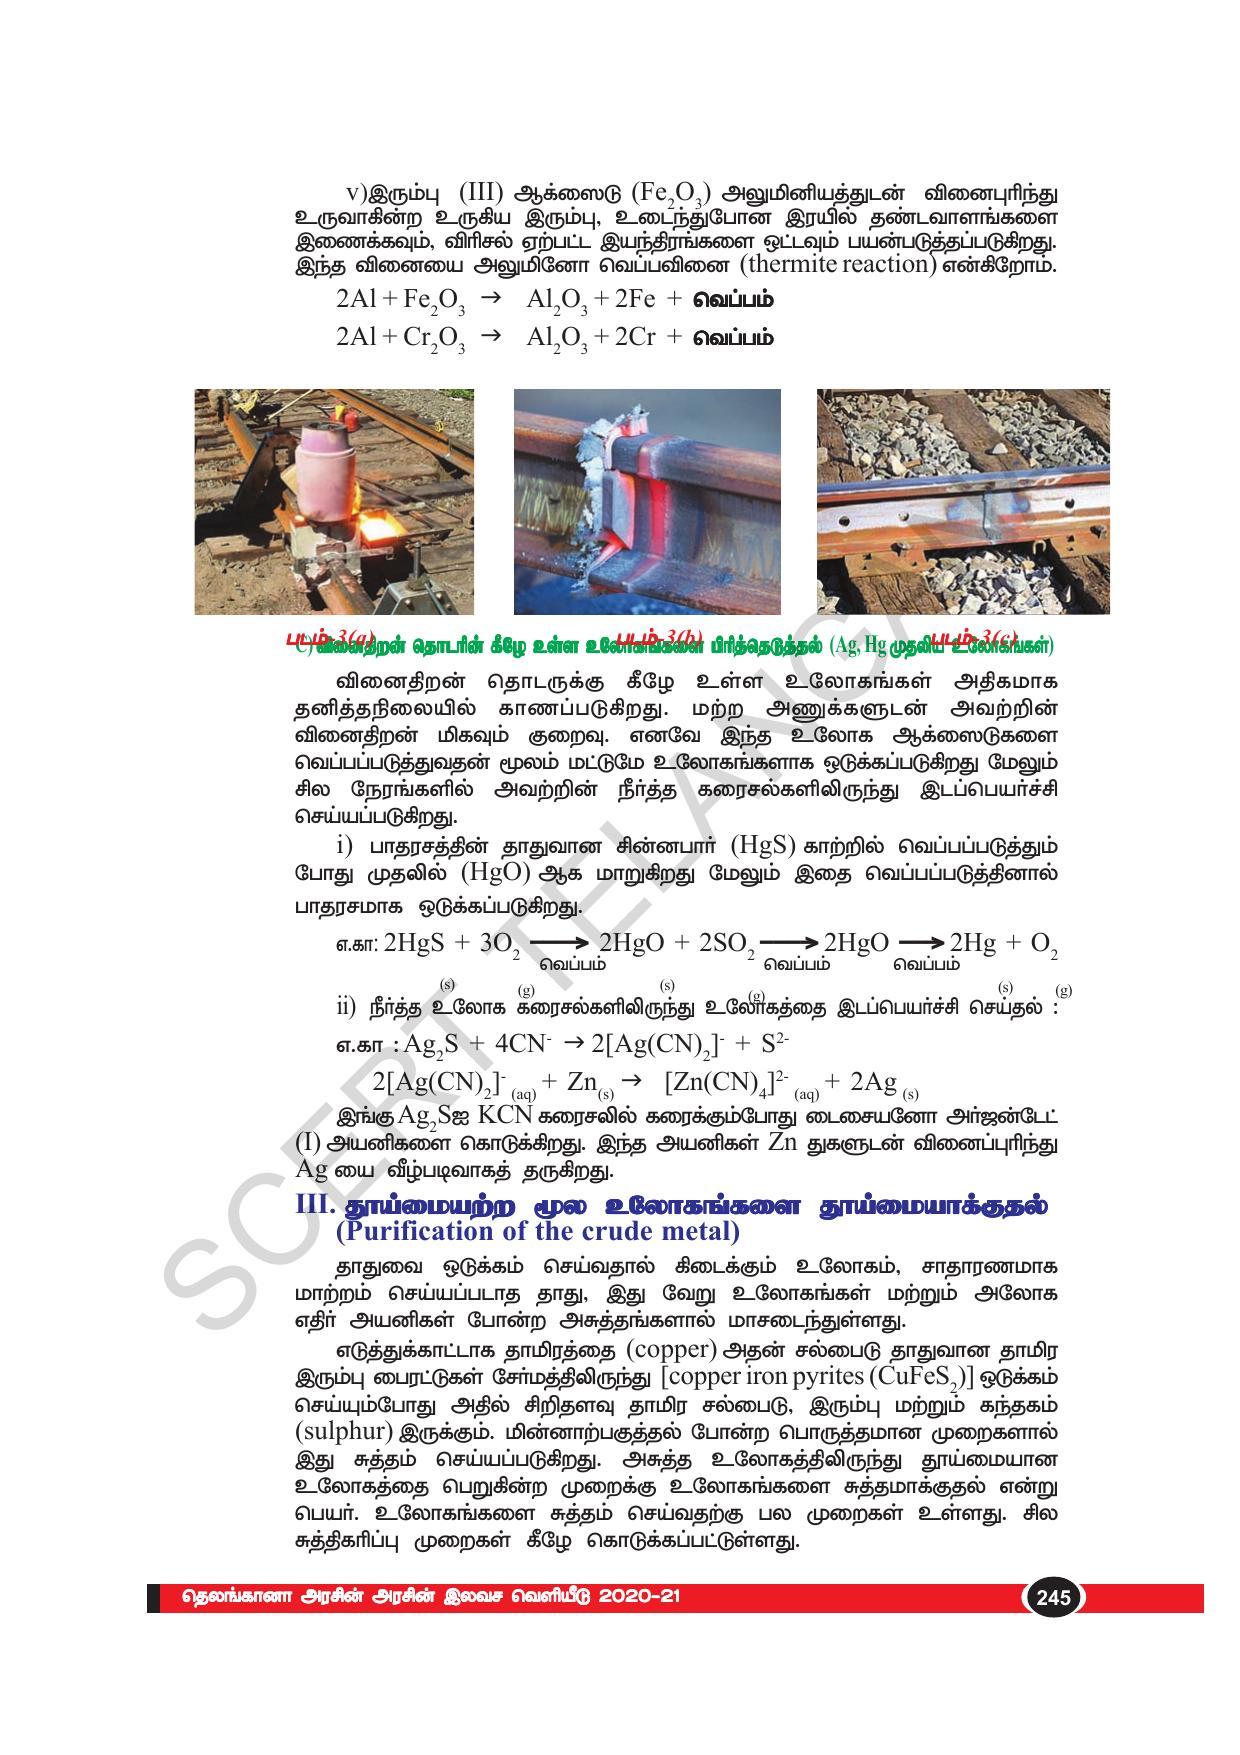 TS SCERT Class 10 Physical Science(Tamil Medium) Text Book - Page 257